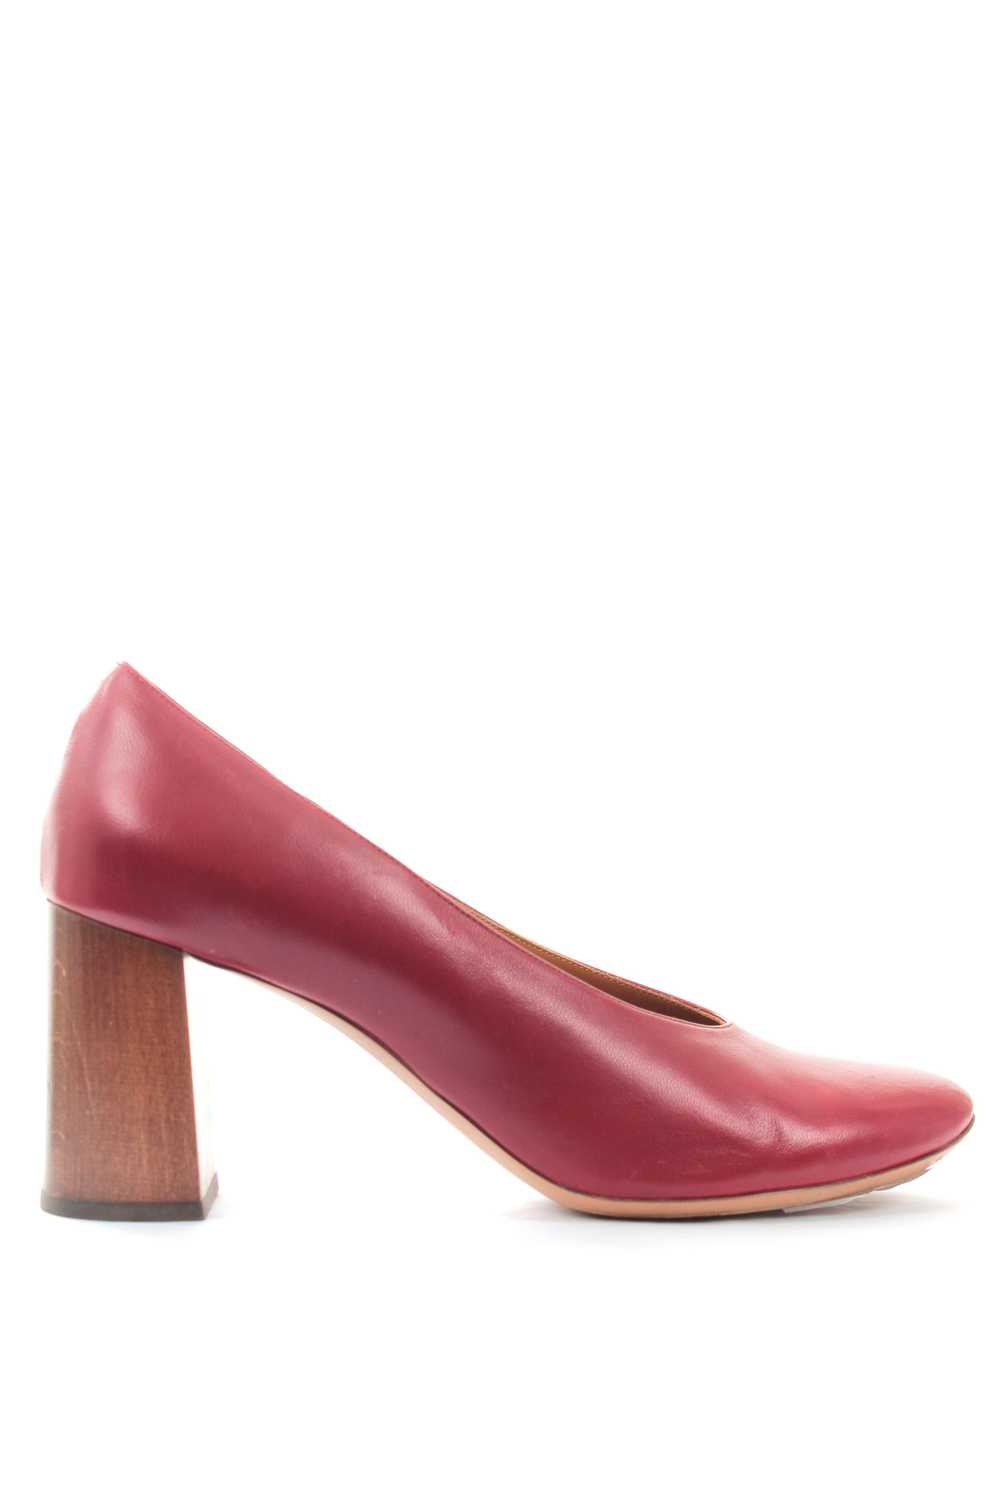 Chloe Red leather wooden block heeled pumps - image 5